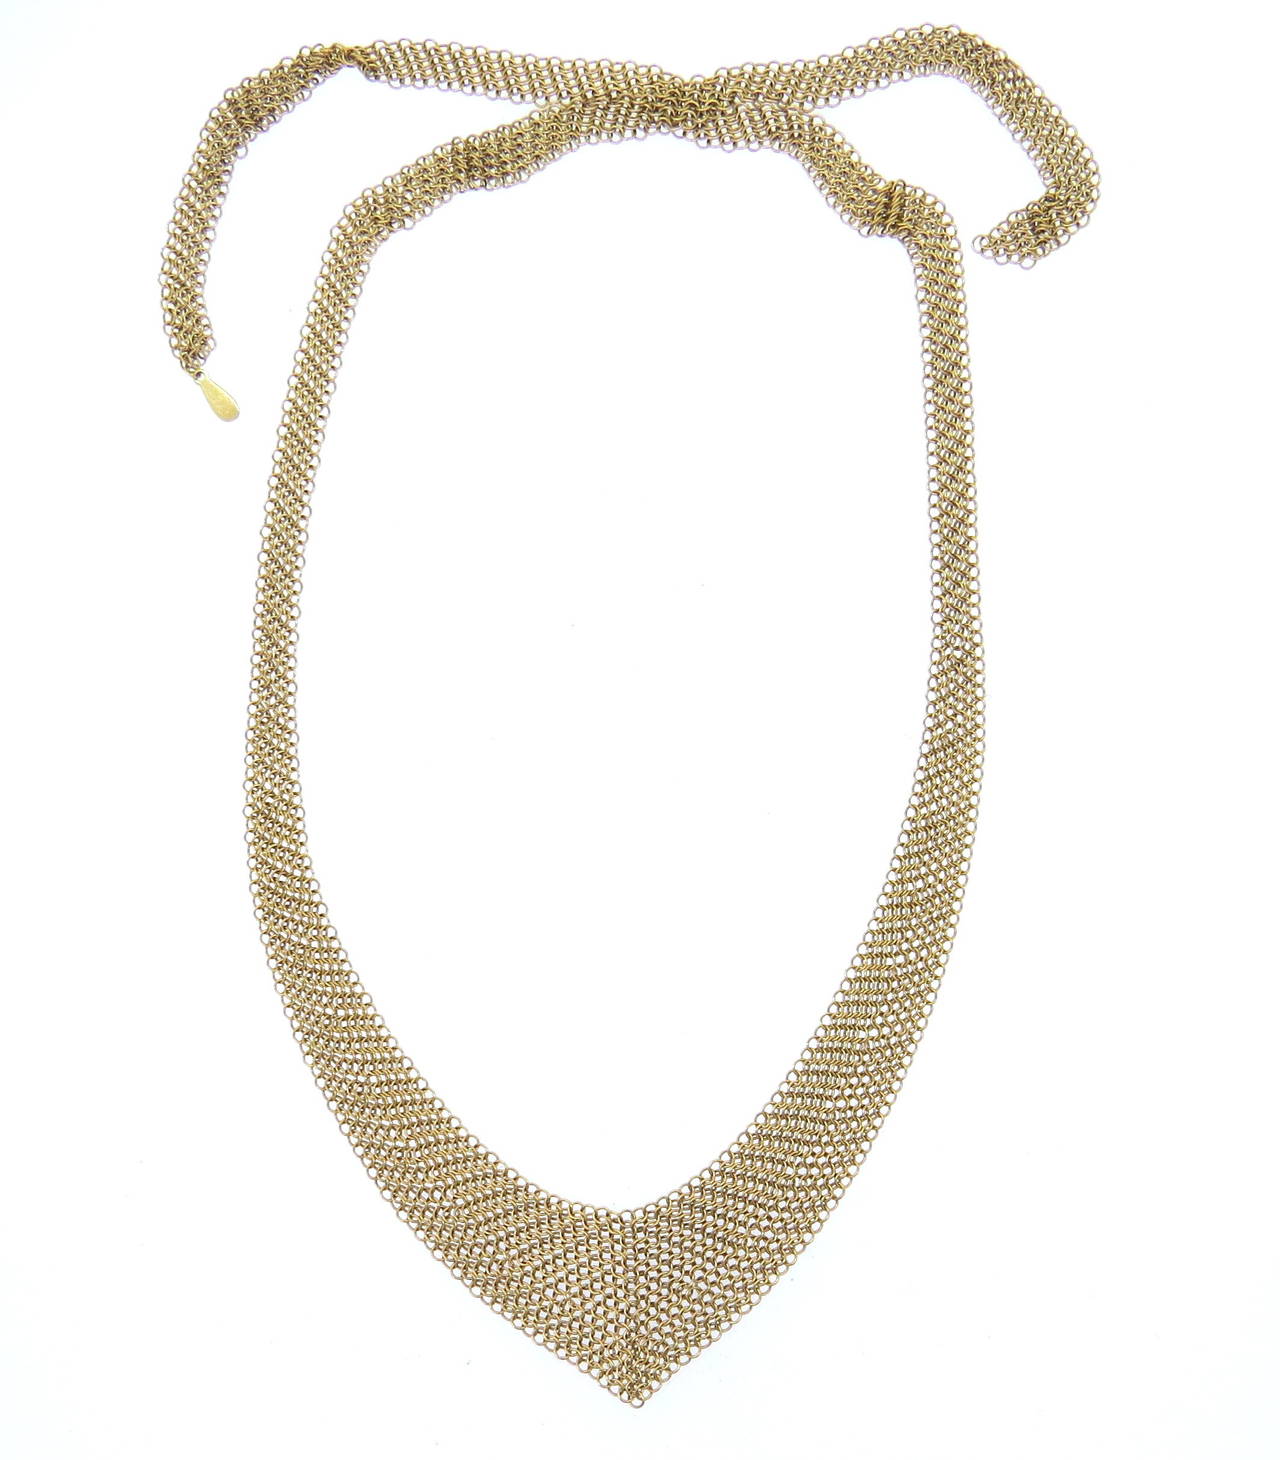 An 18k yellow gold mesh necklace designed by Elsa Peretti for Tiffany & Co.  The necklace measures 26